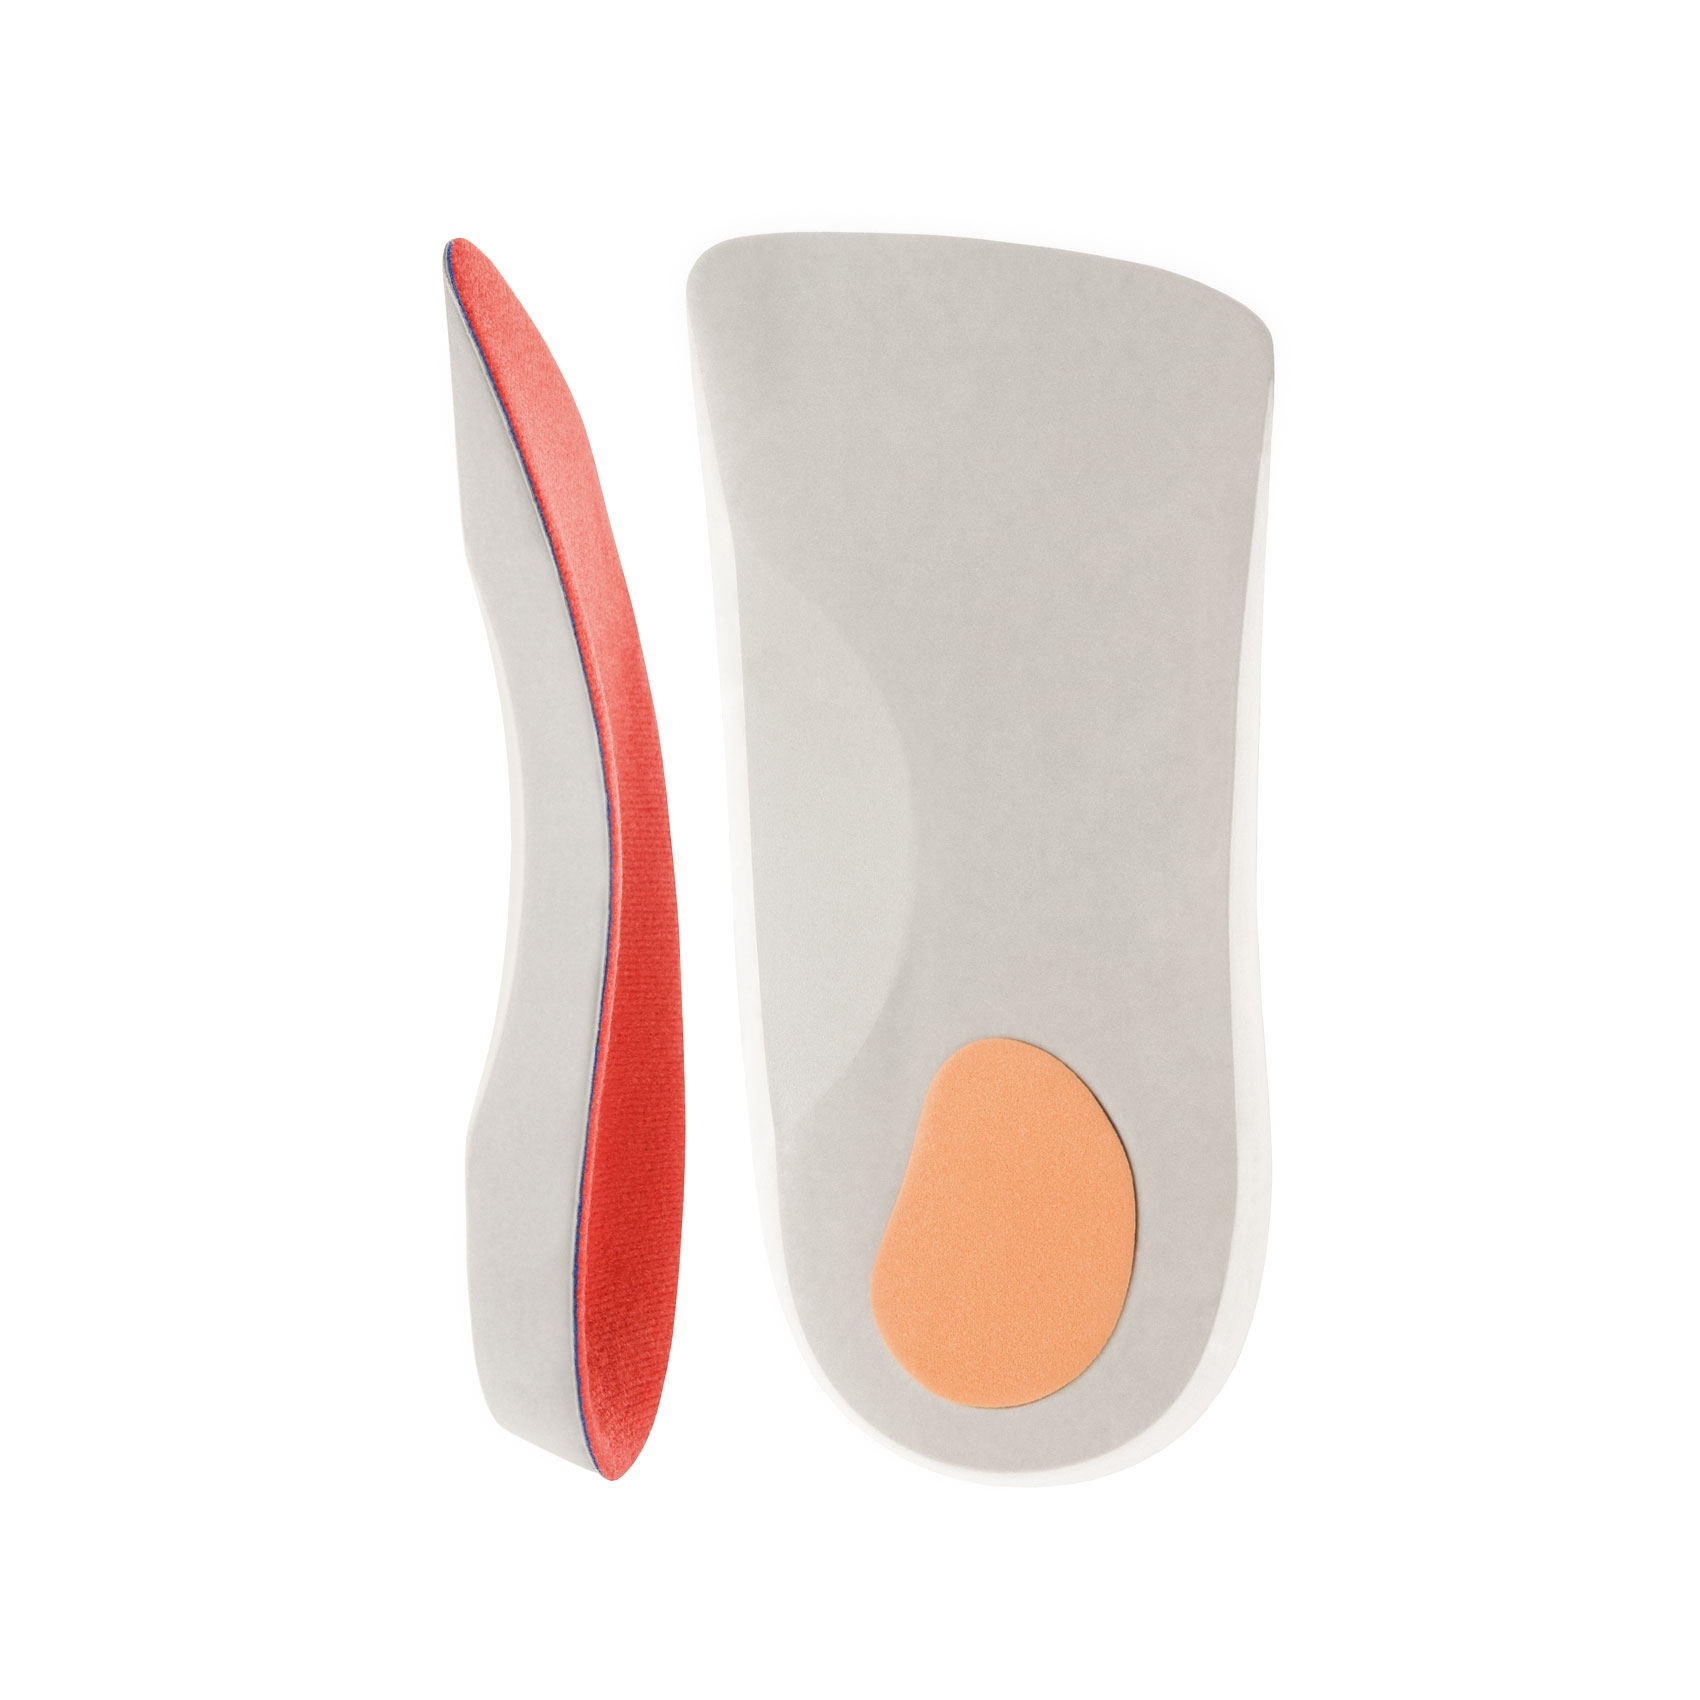 ▻ DJMed Orthotic ¾ Insoles - Shoe Inserts